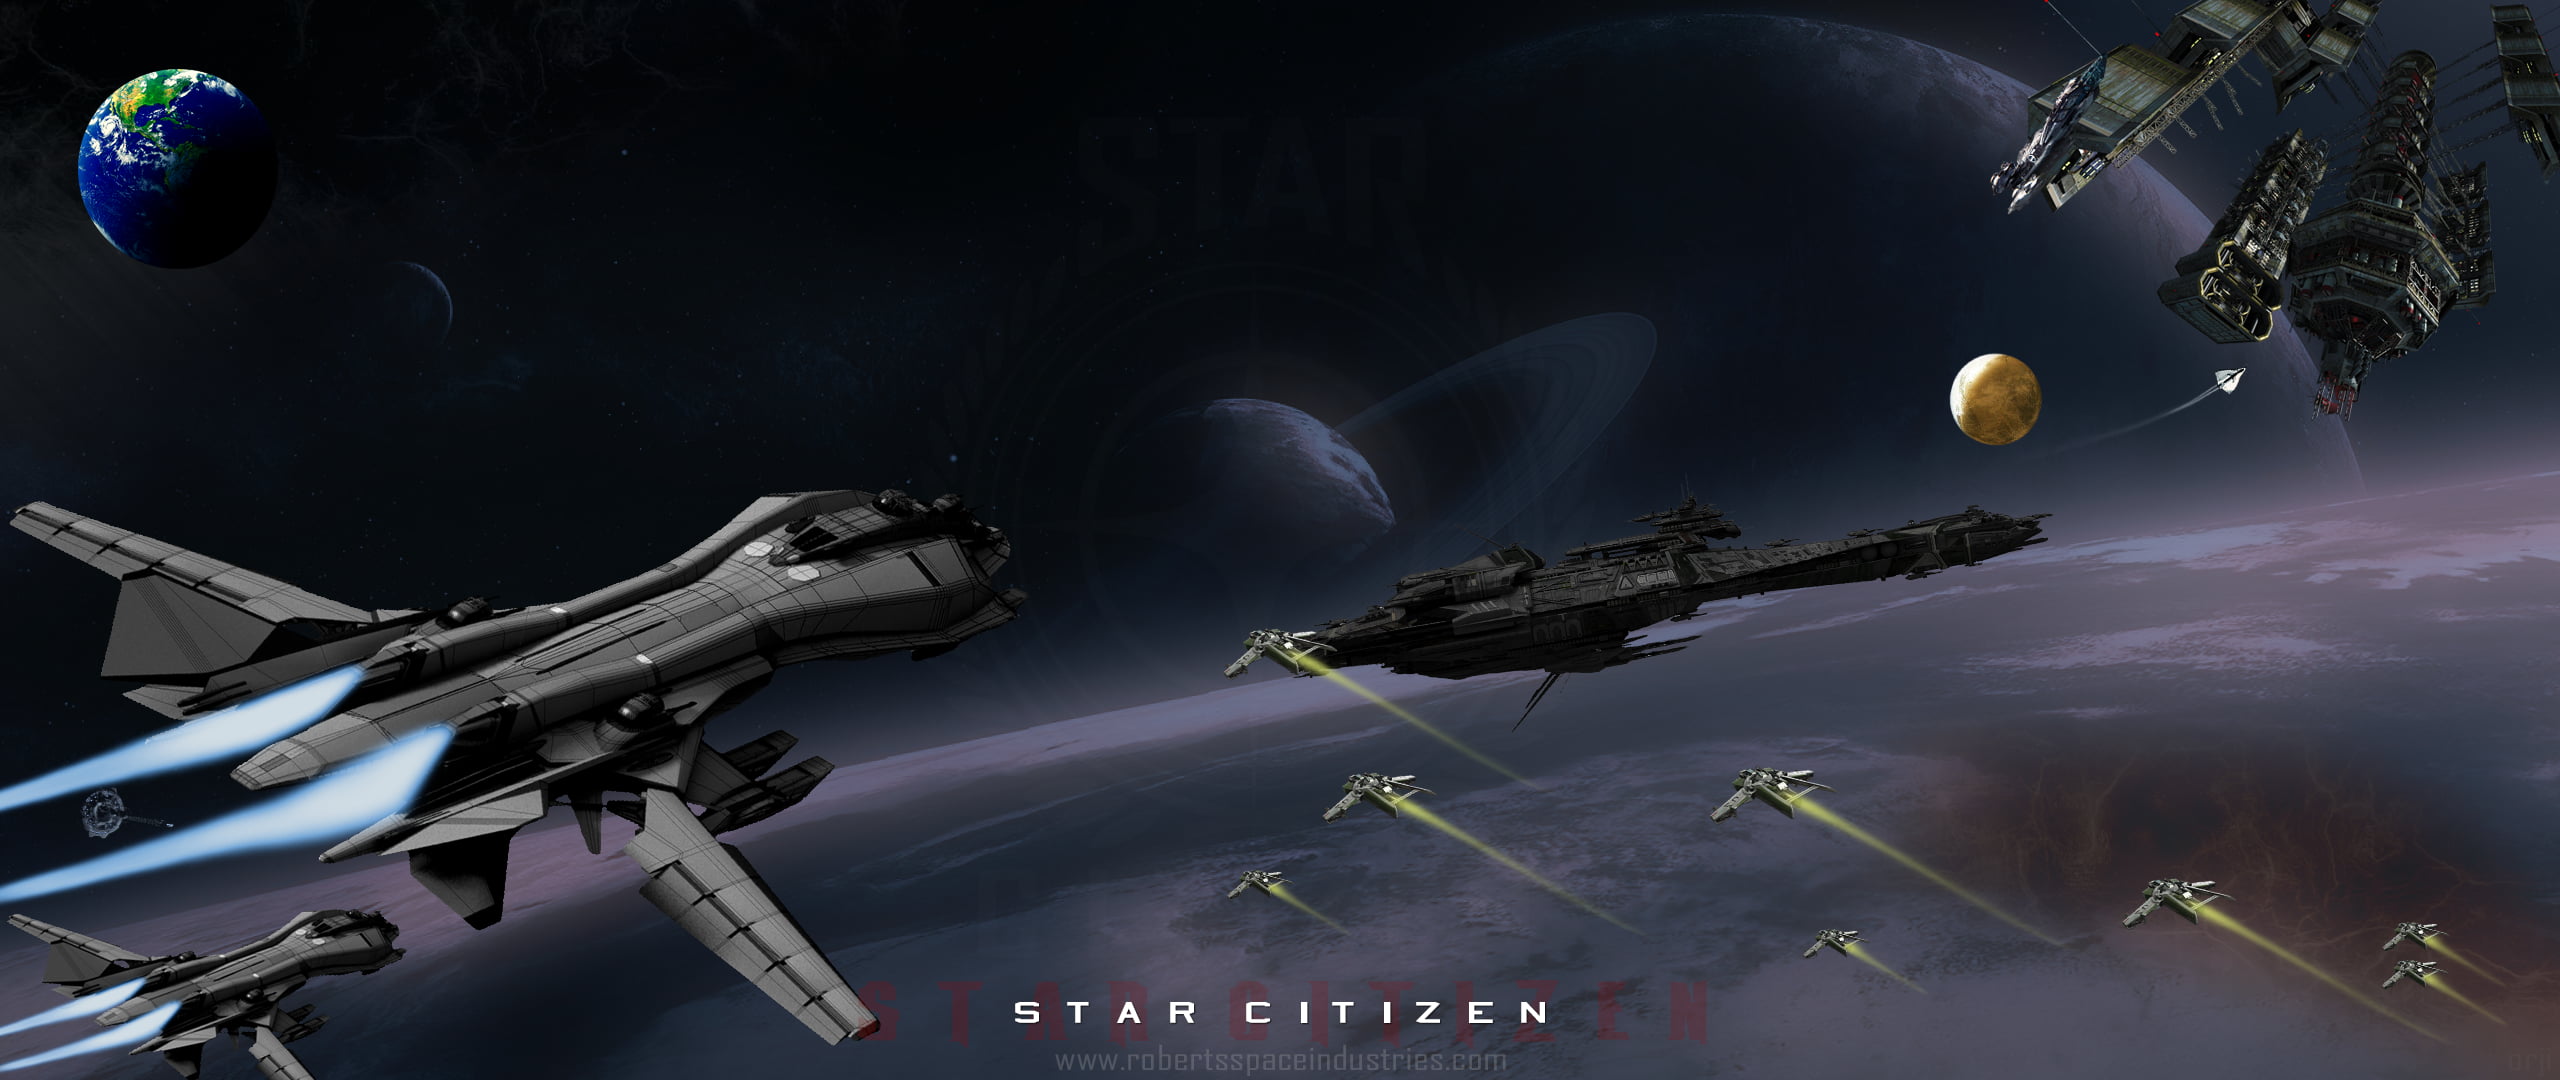 aircraft flying over earth wallpaper, Star Citizen, space, planet, spaceship